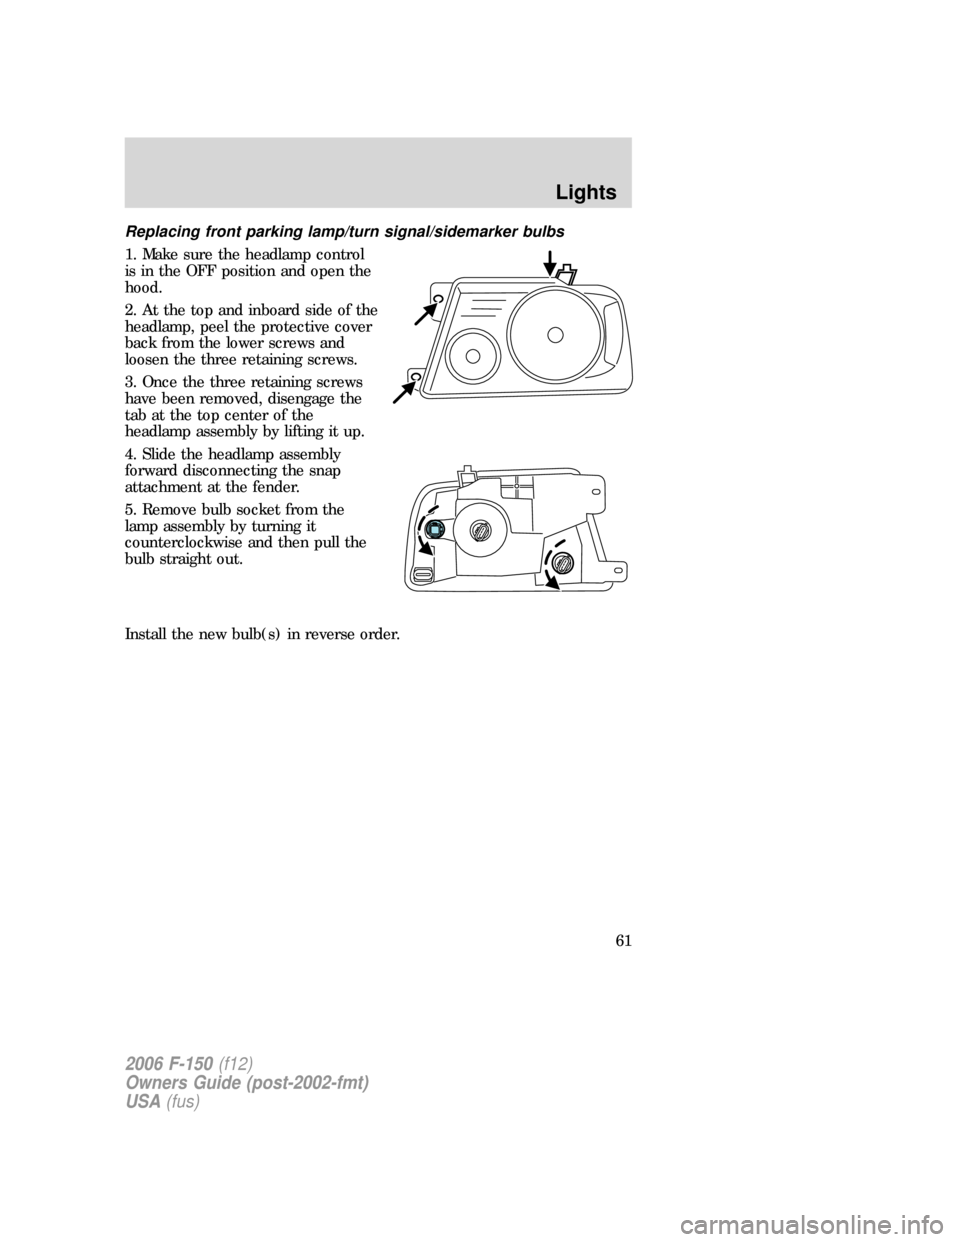 FORD F150 2006 11.G Owners Manual Replacing front parking lamp/turn signal/sidemarker bulbs
1. Make sure the headlamp control
is in the OFF position and open the
hood.
2. At the top and inboard side of the
headlamp, peel the protectiv